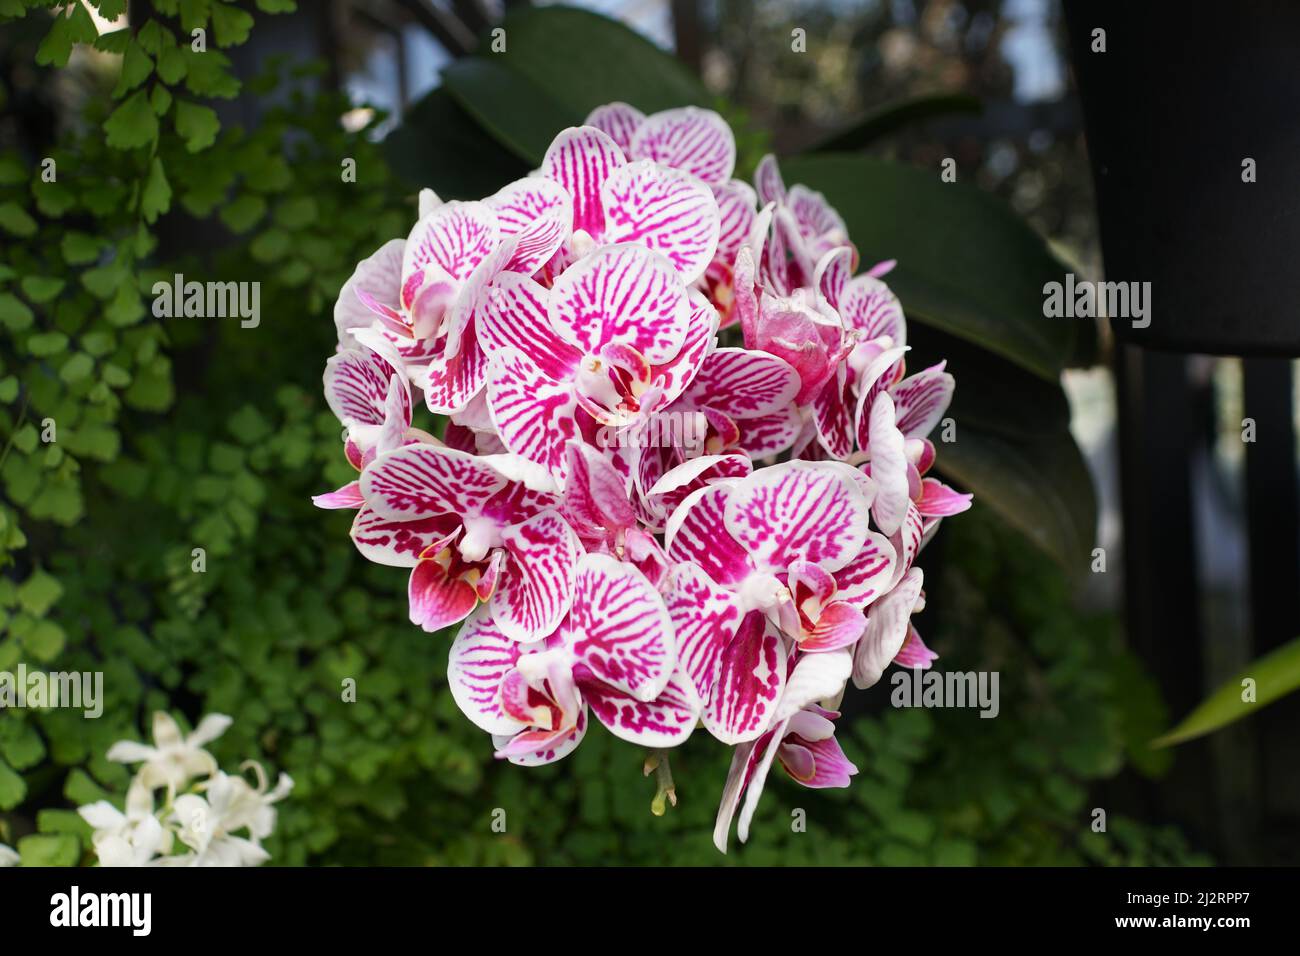 Beautiful white and pink color of Phalaenopsis Taida's King Caroline Little Zebra orchids Stock Photo